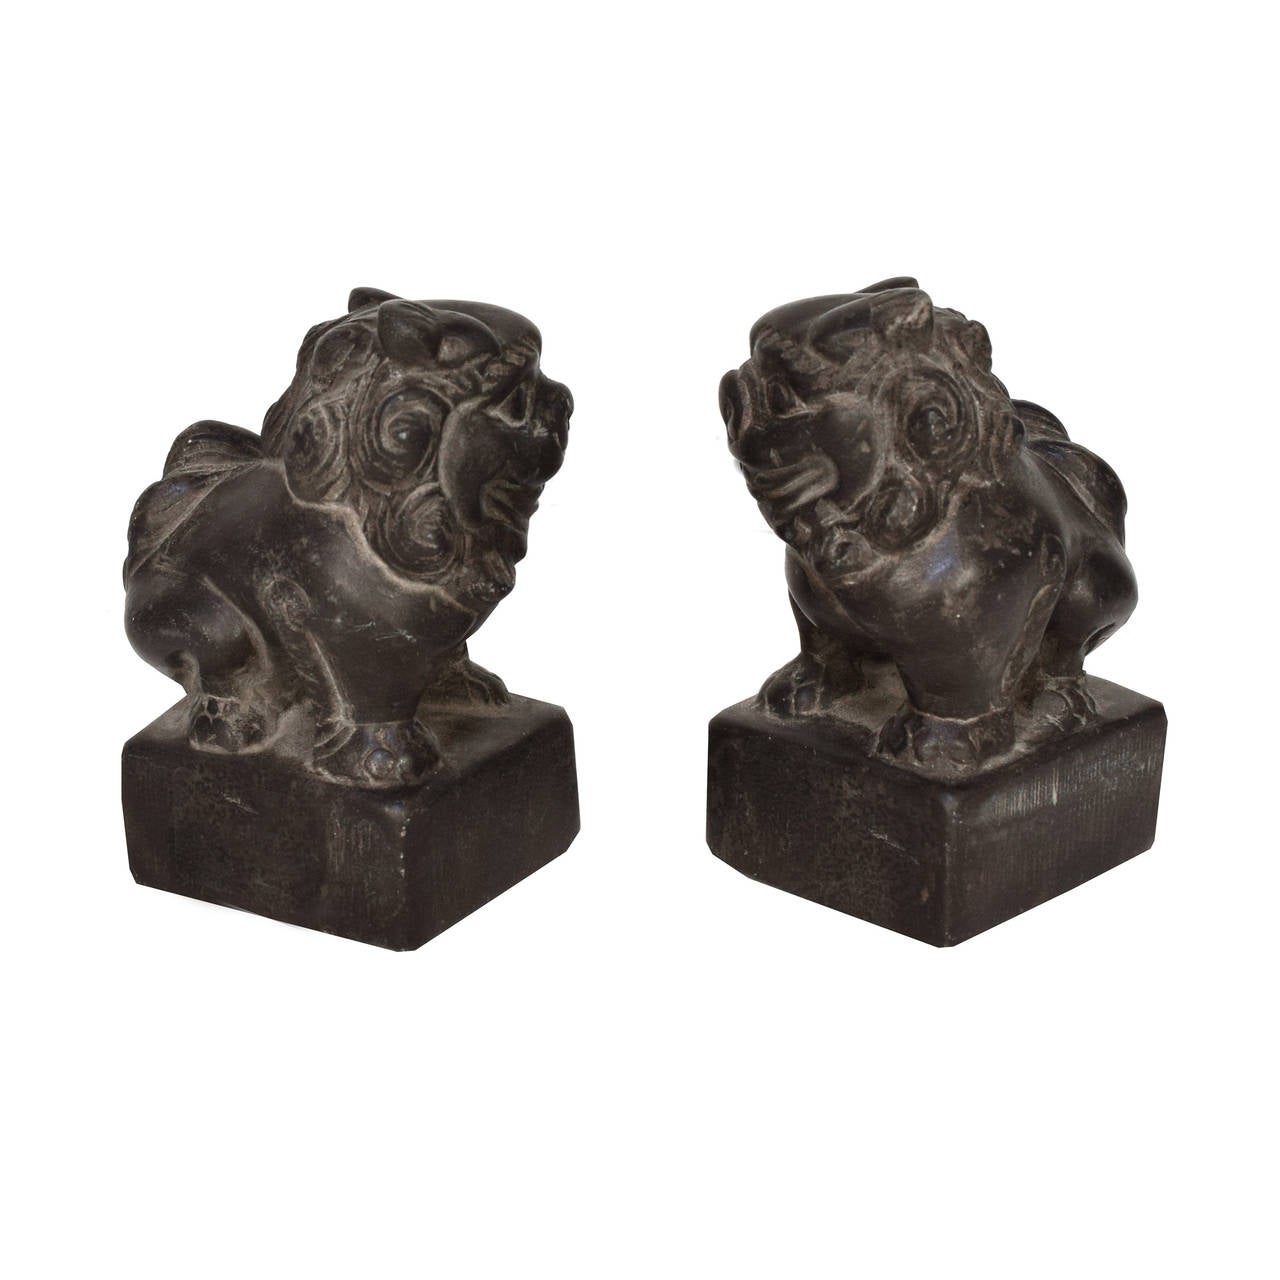 A pair of petite fu dog charms from Northern China. These c. 1800 stone fu dogs are mirror images of each other and are a symbol of protection in China.
